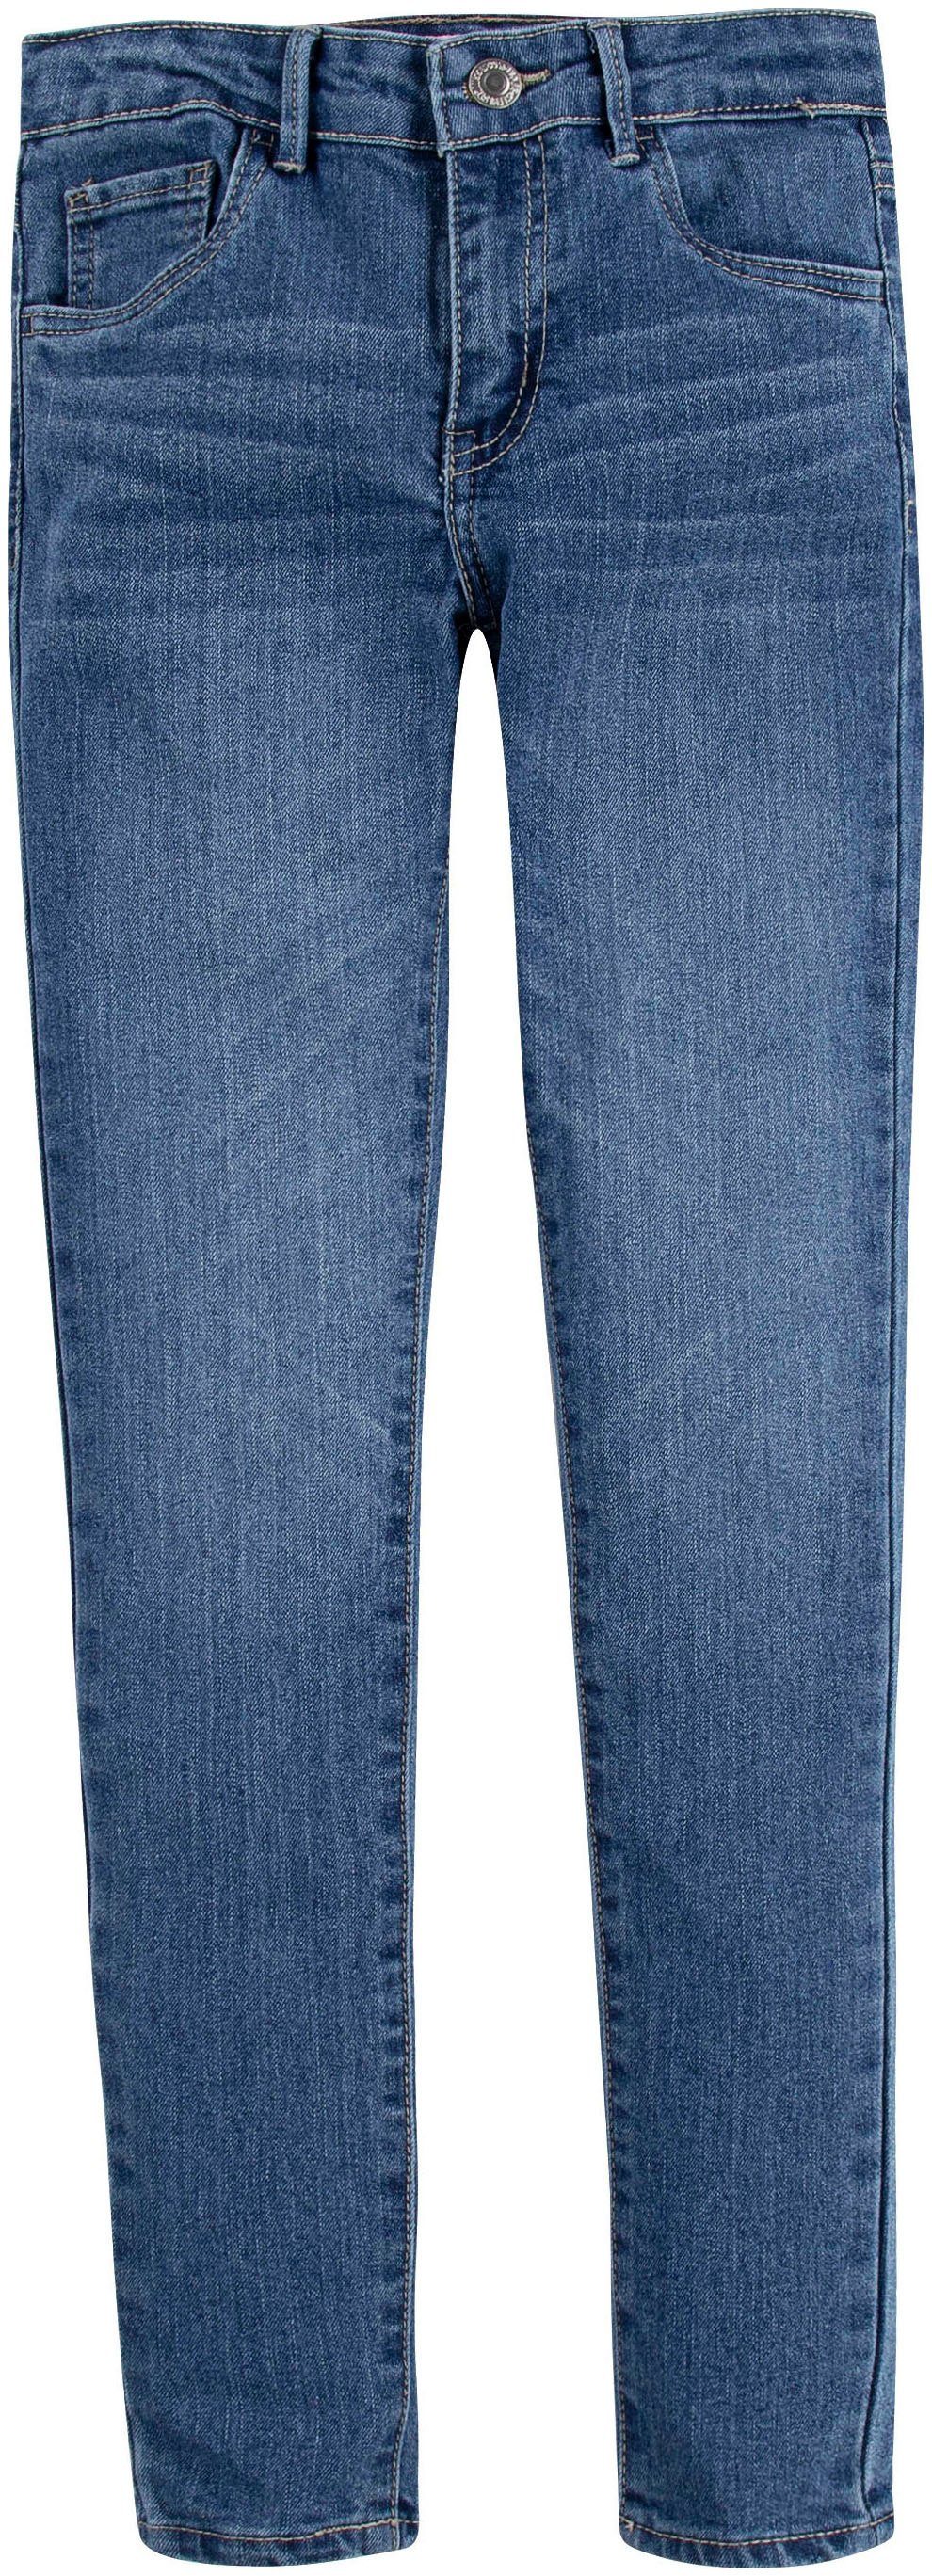 FIT Stretch-Jeans Kids blue GIRLS 710™ JEANS for Levi's® SUPER used mid SKINNY